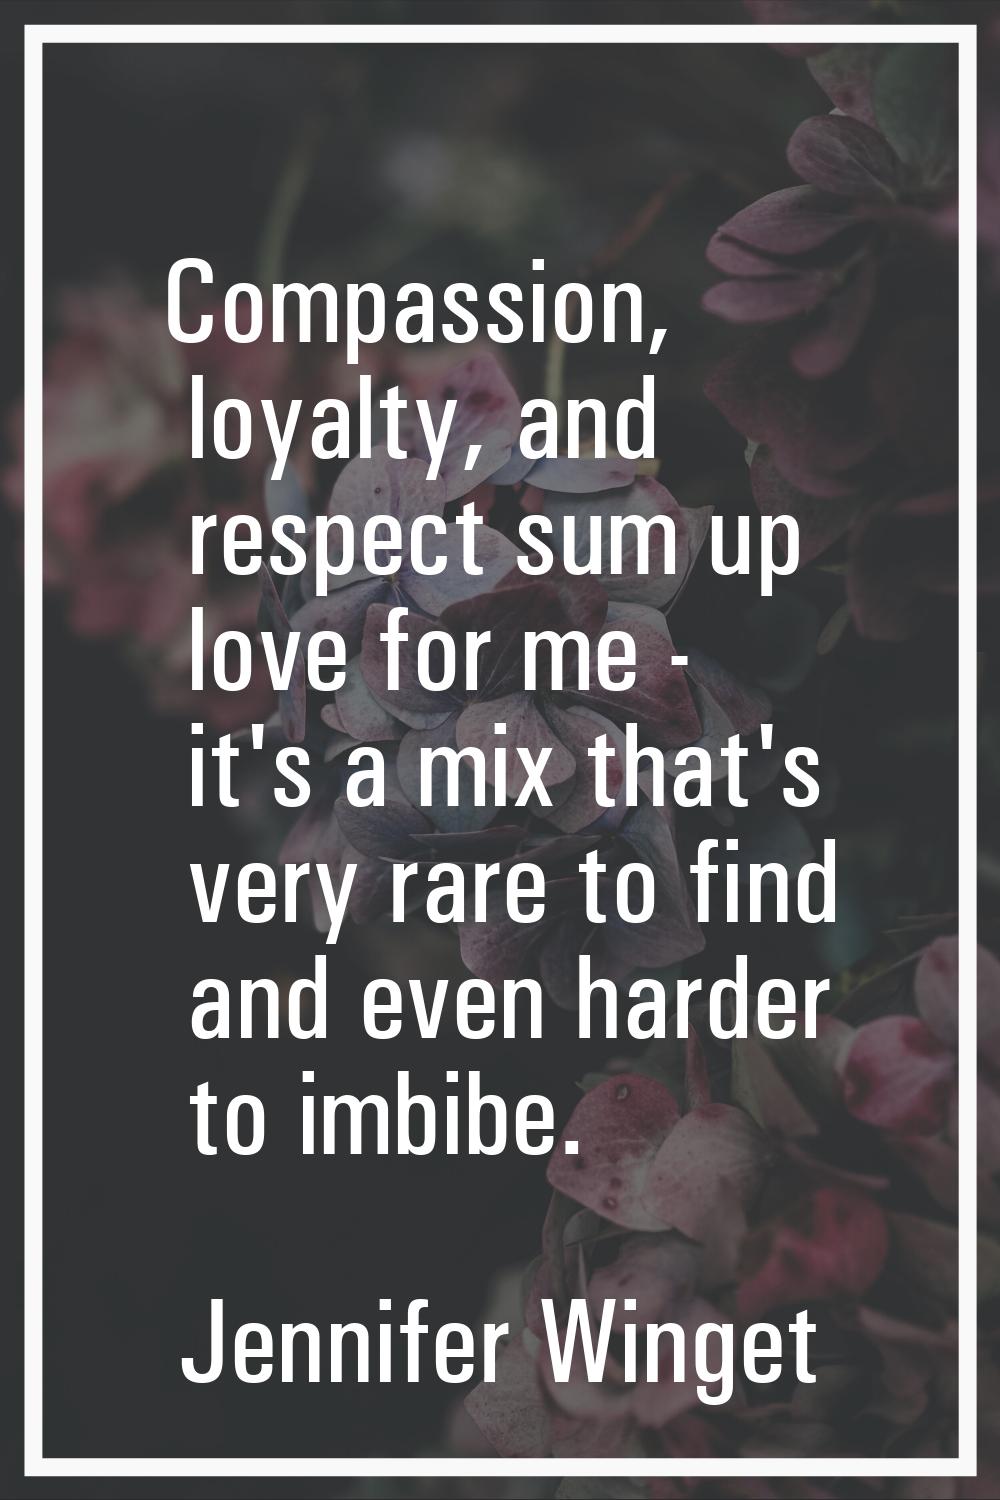 Compassion, loyalty, and respect sum up love for me - it's a mix that's very rare to find and even 